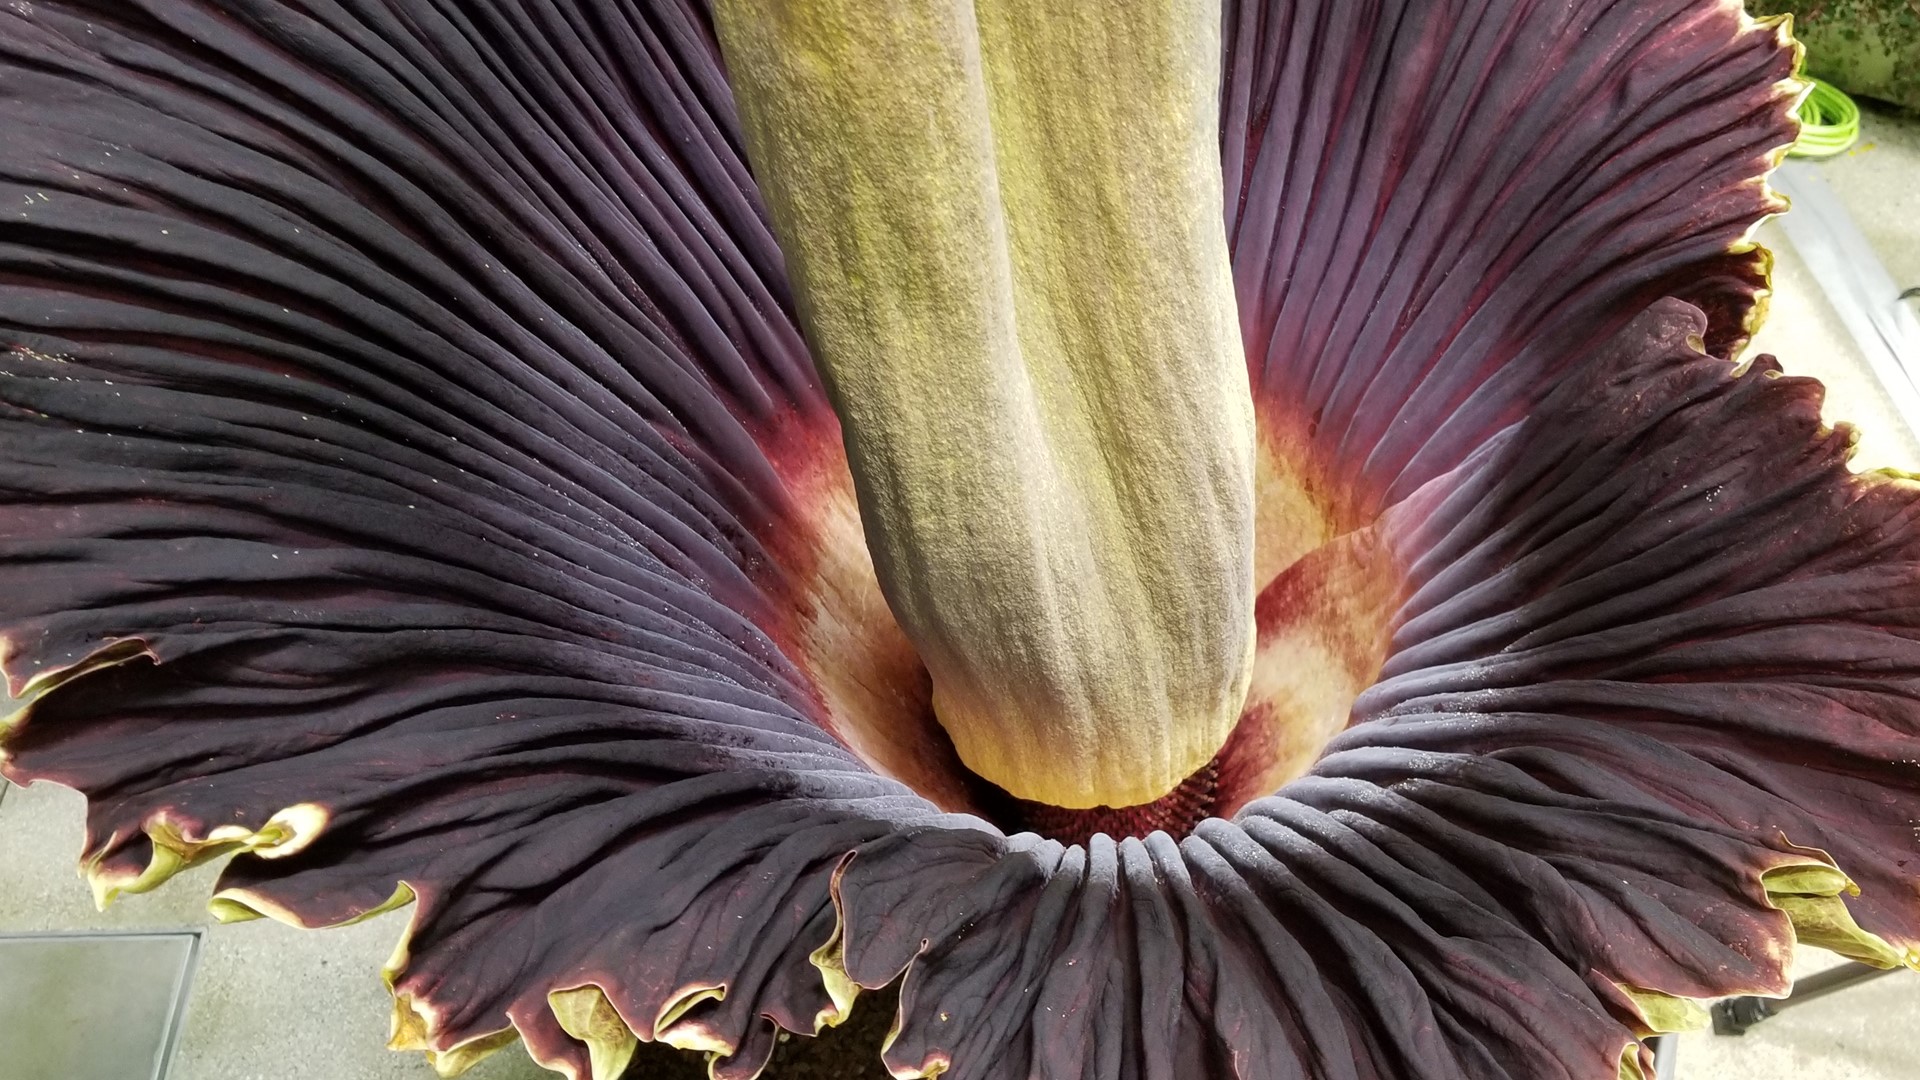 Corpse flower blooming inside Seattle's Amazon Spheres | king5.com